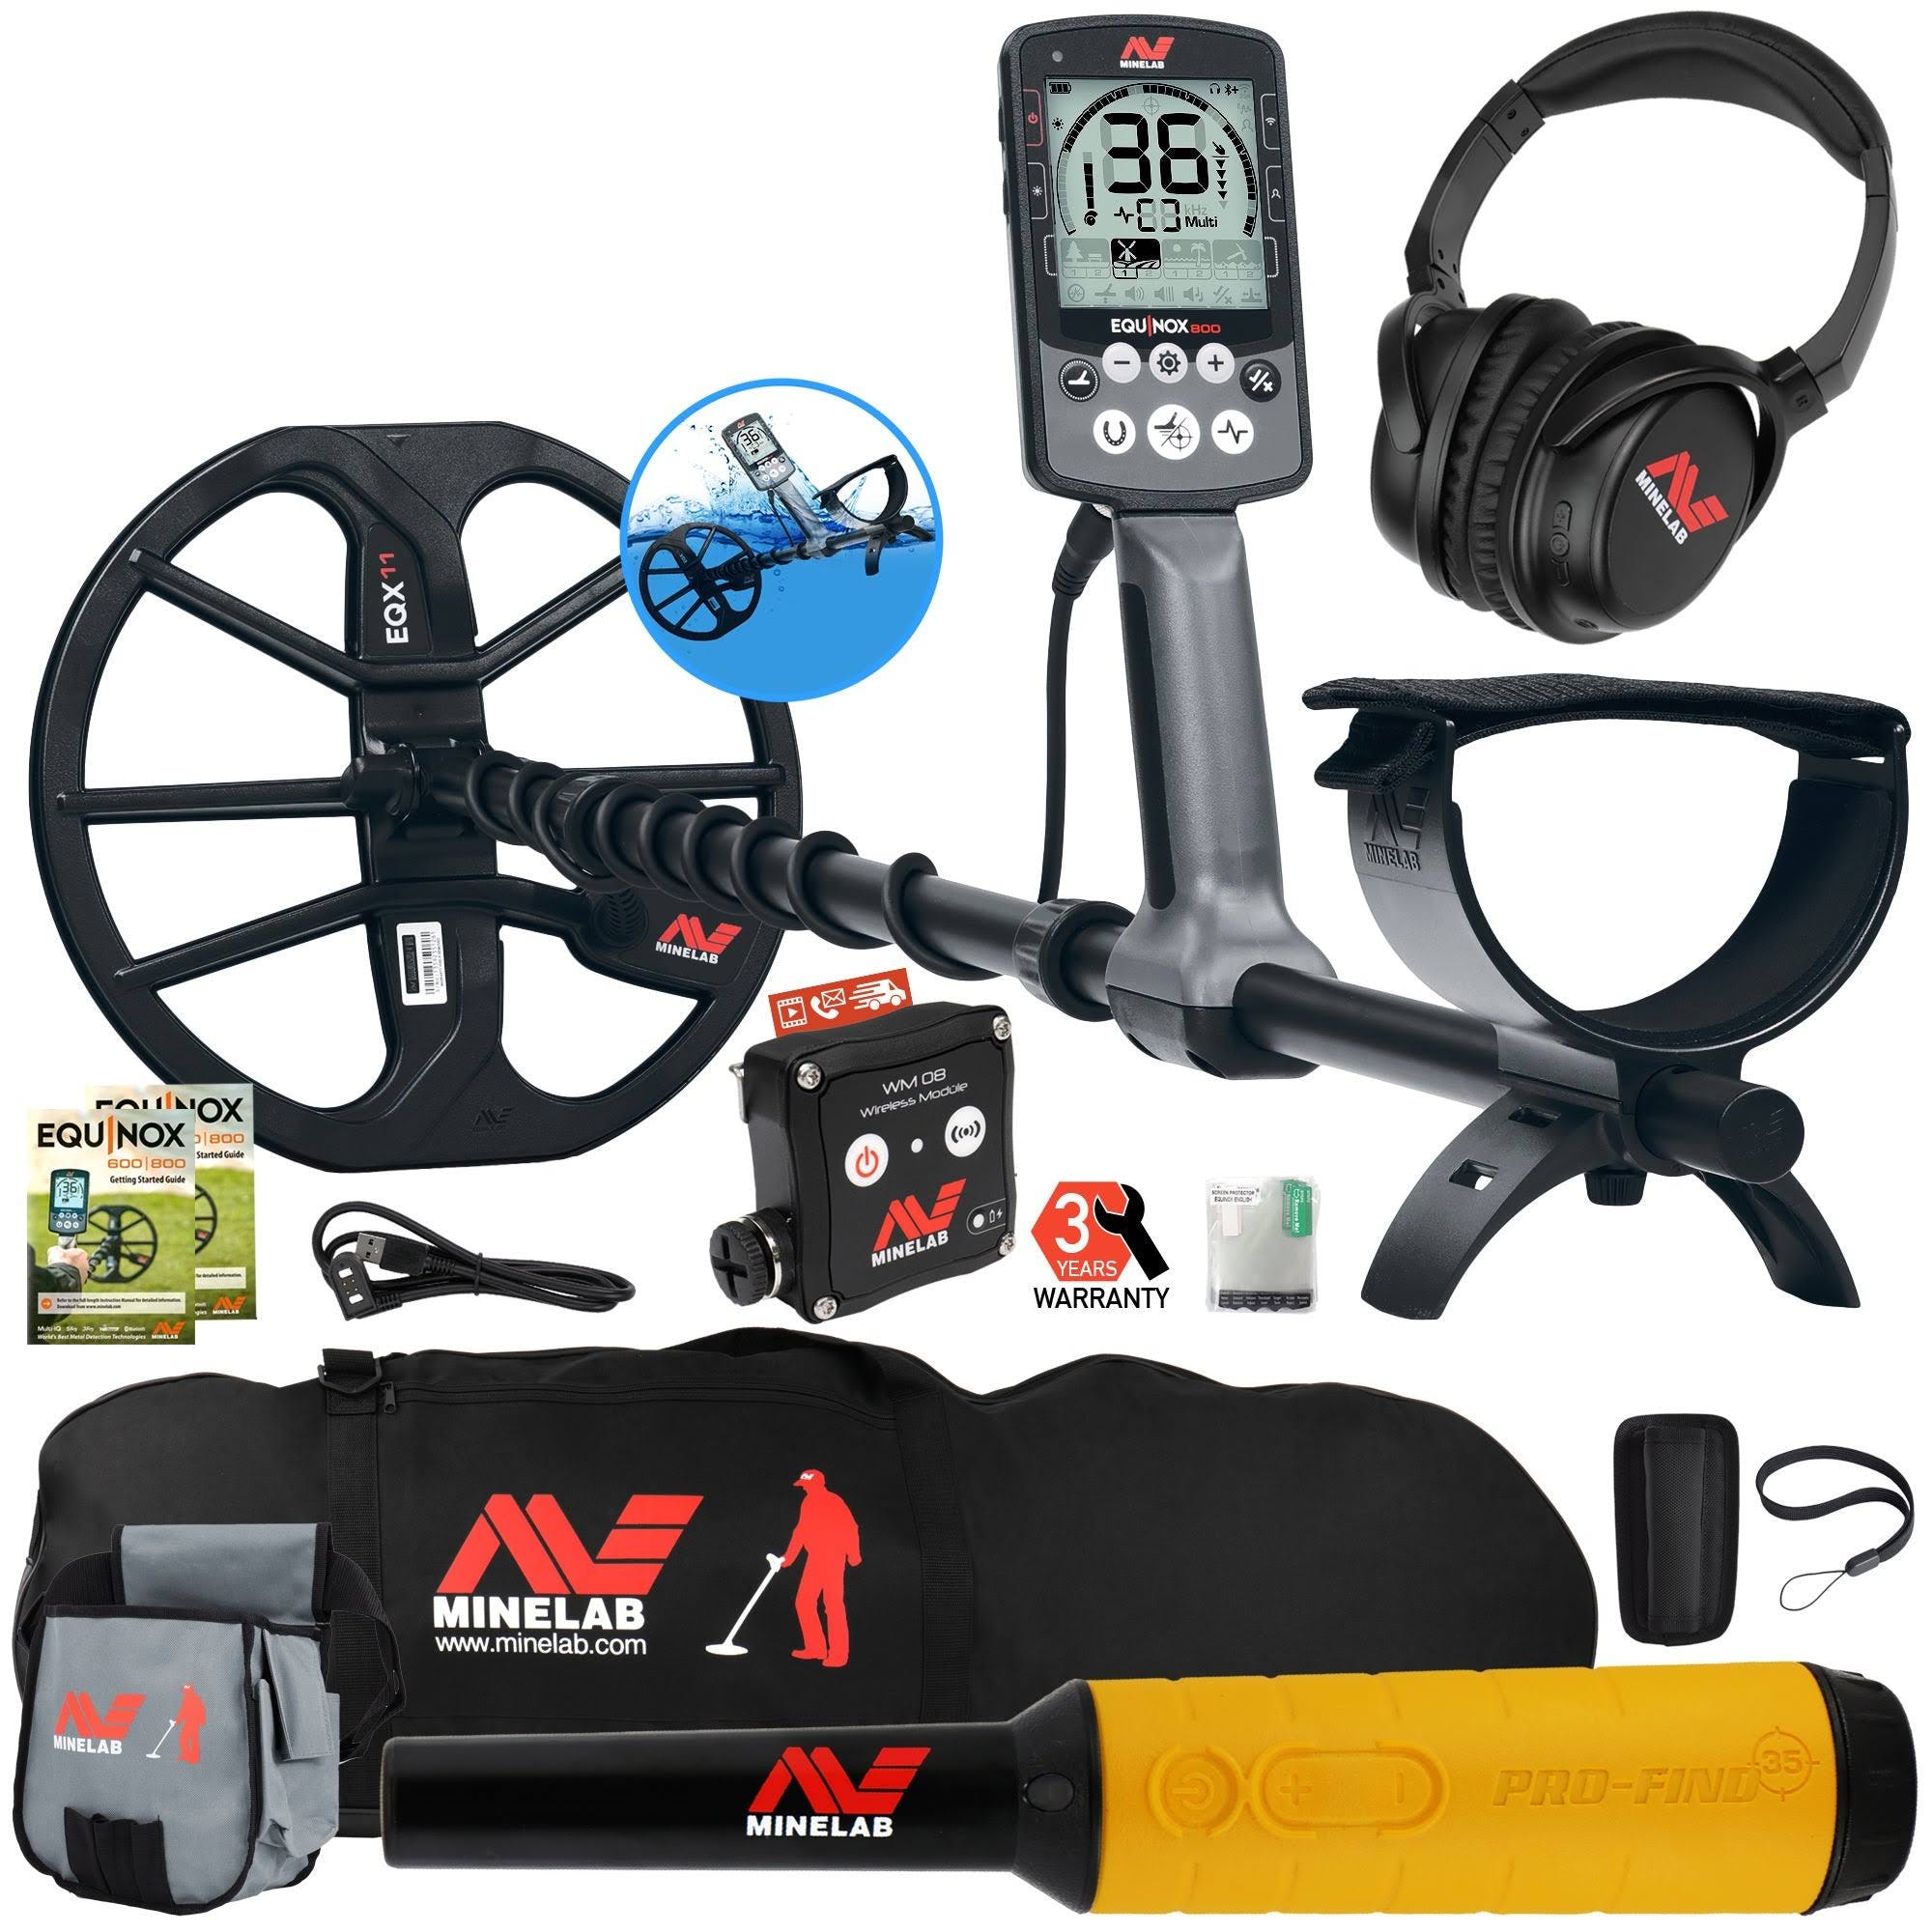 Minelab Equinox 800 Metal Detector: Pro Find 35, Carry Bag, and Finds Pouch Included | Image